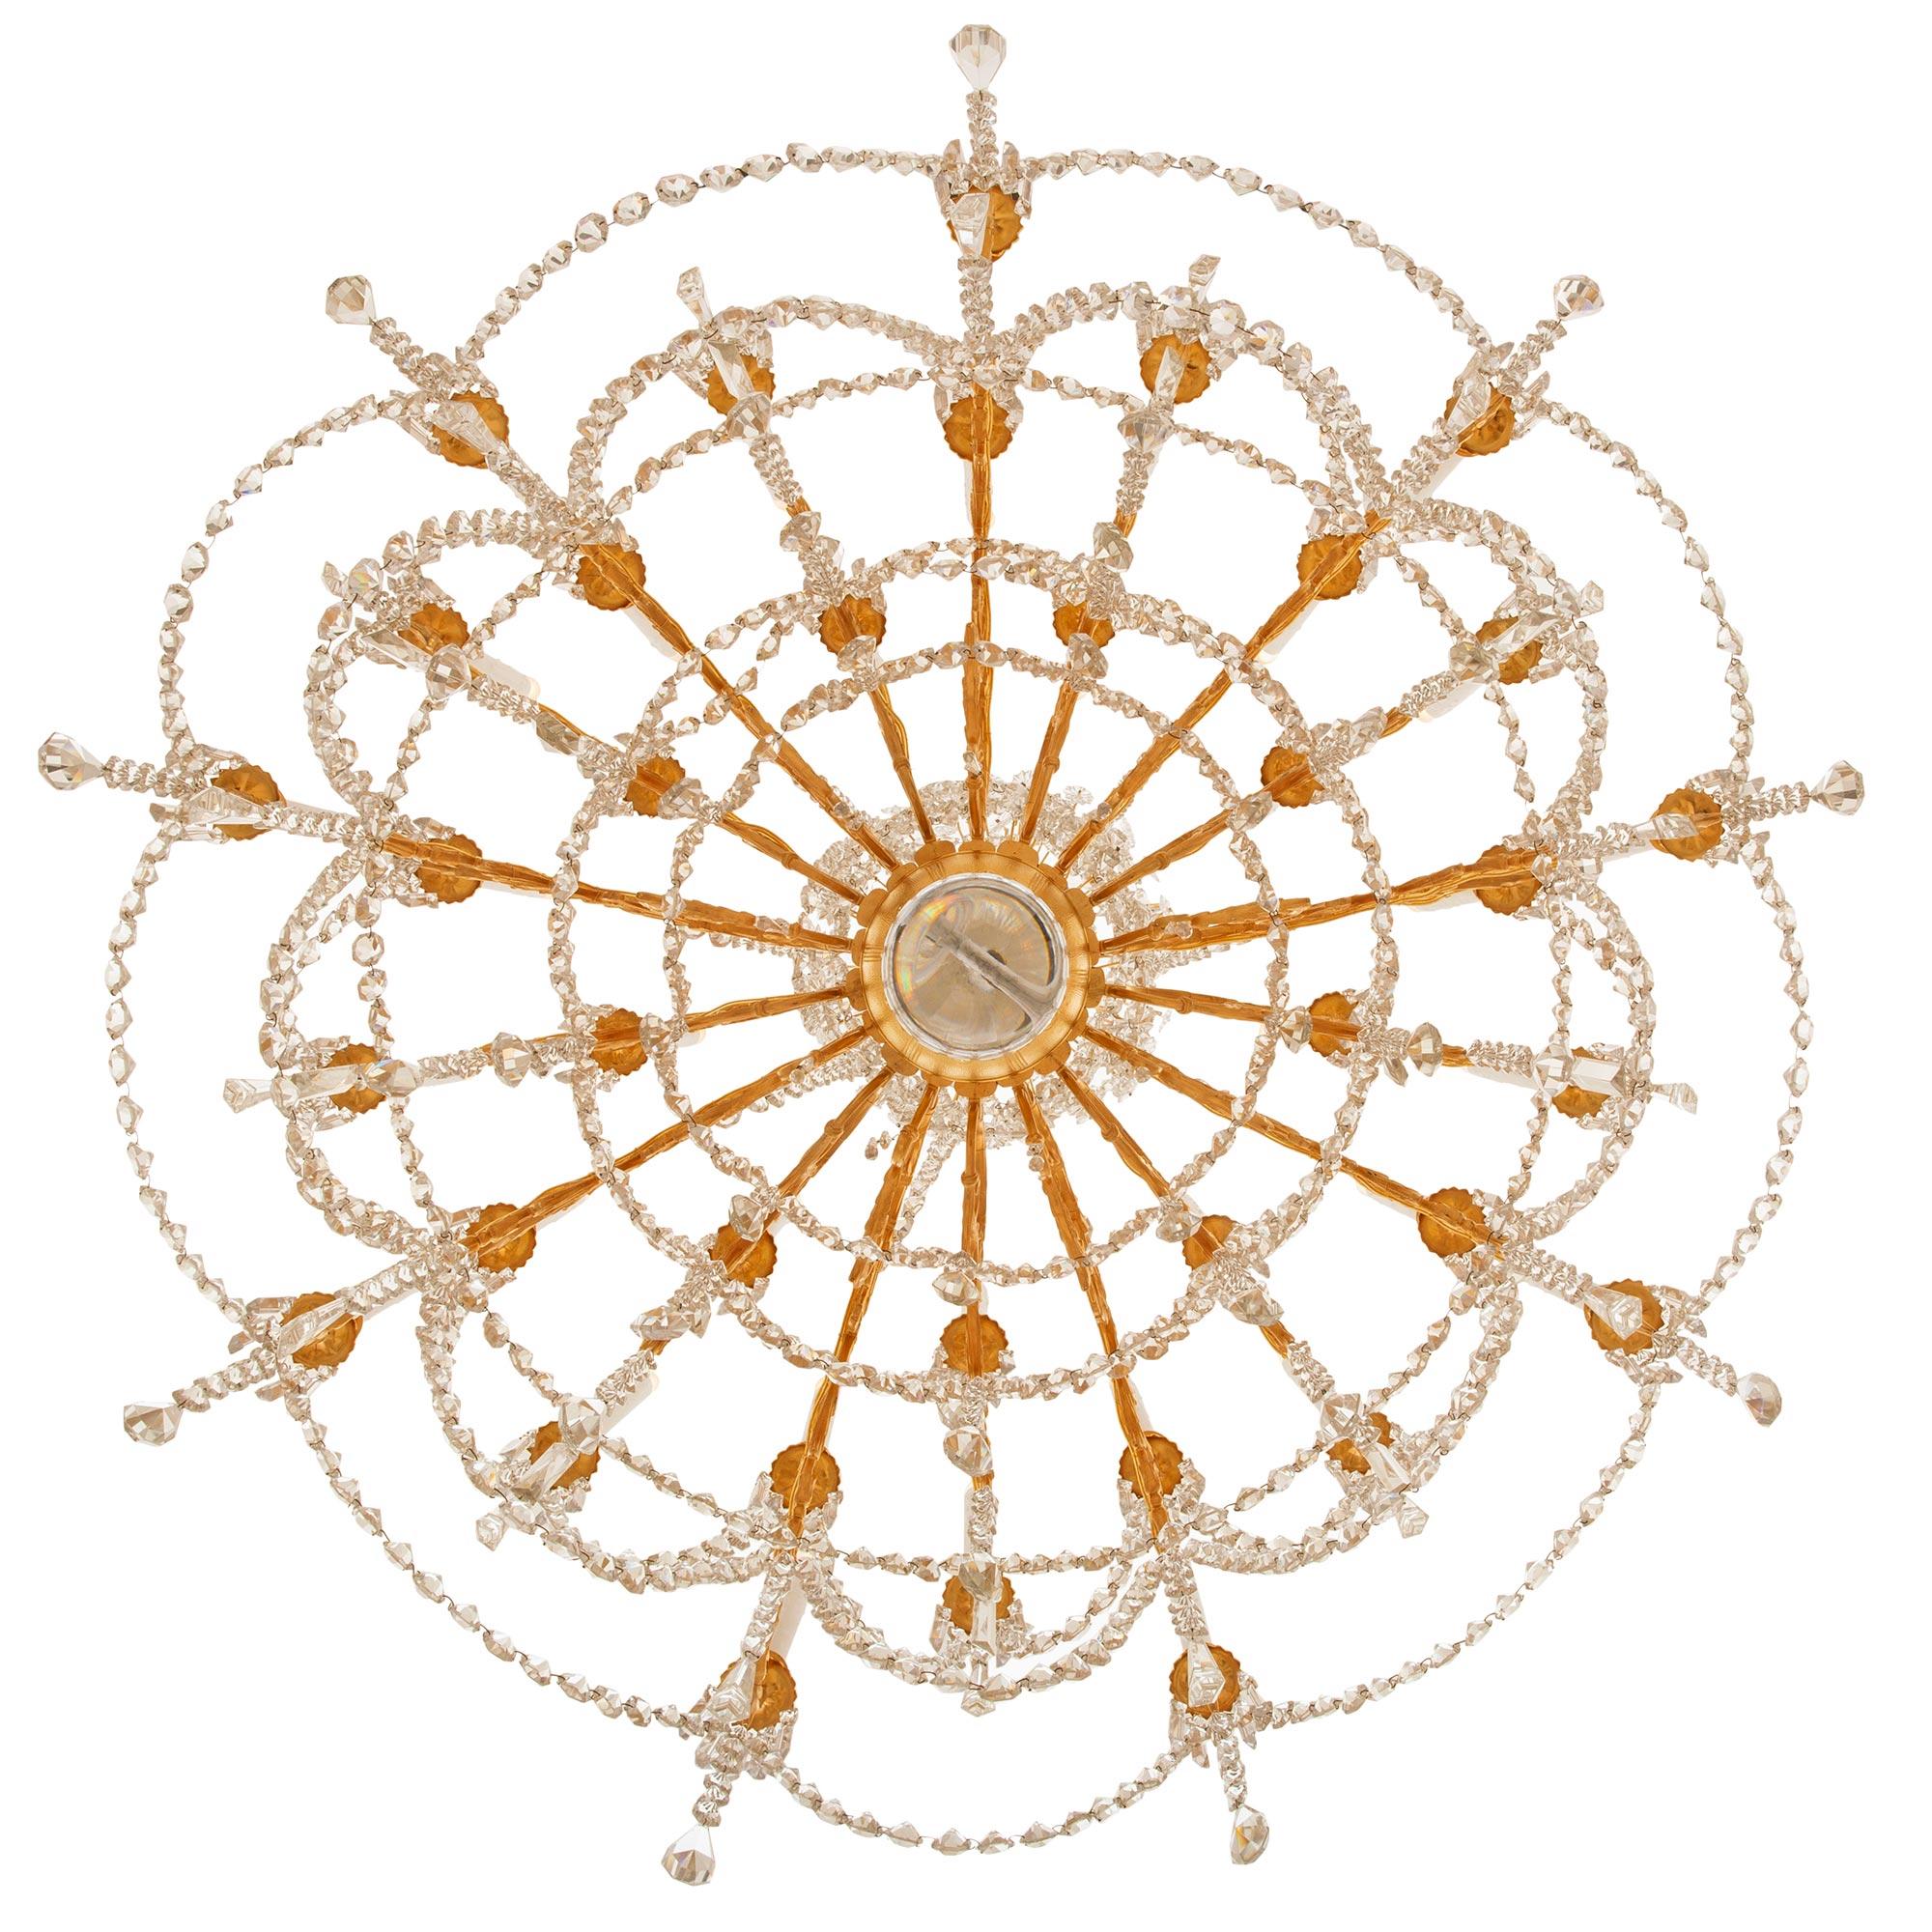 A spectacular and high very quality French mid 19th century Louis XVI st. ormolu and Baccarat crystal chandelier. The thirty-six arm chandelier is centered by a beautiful solid bottom Baccarat crystal ball below a stunning array of most decorative